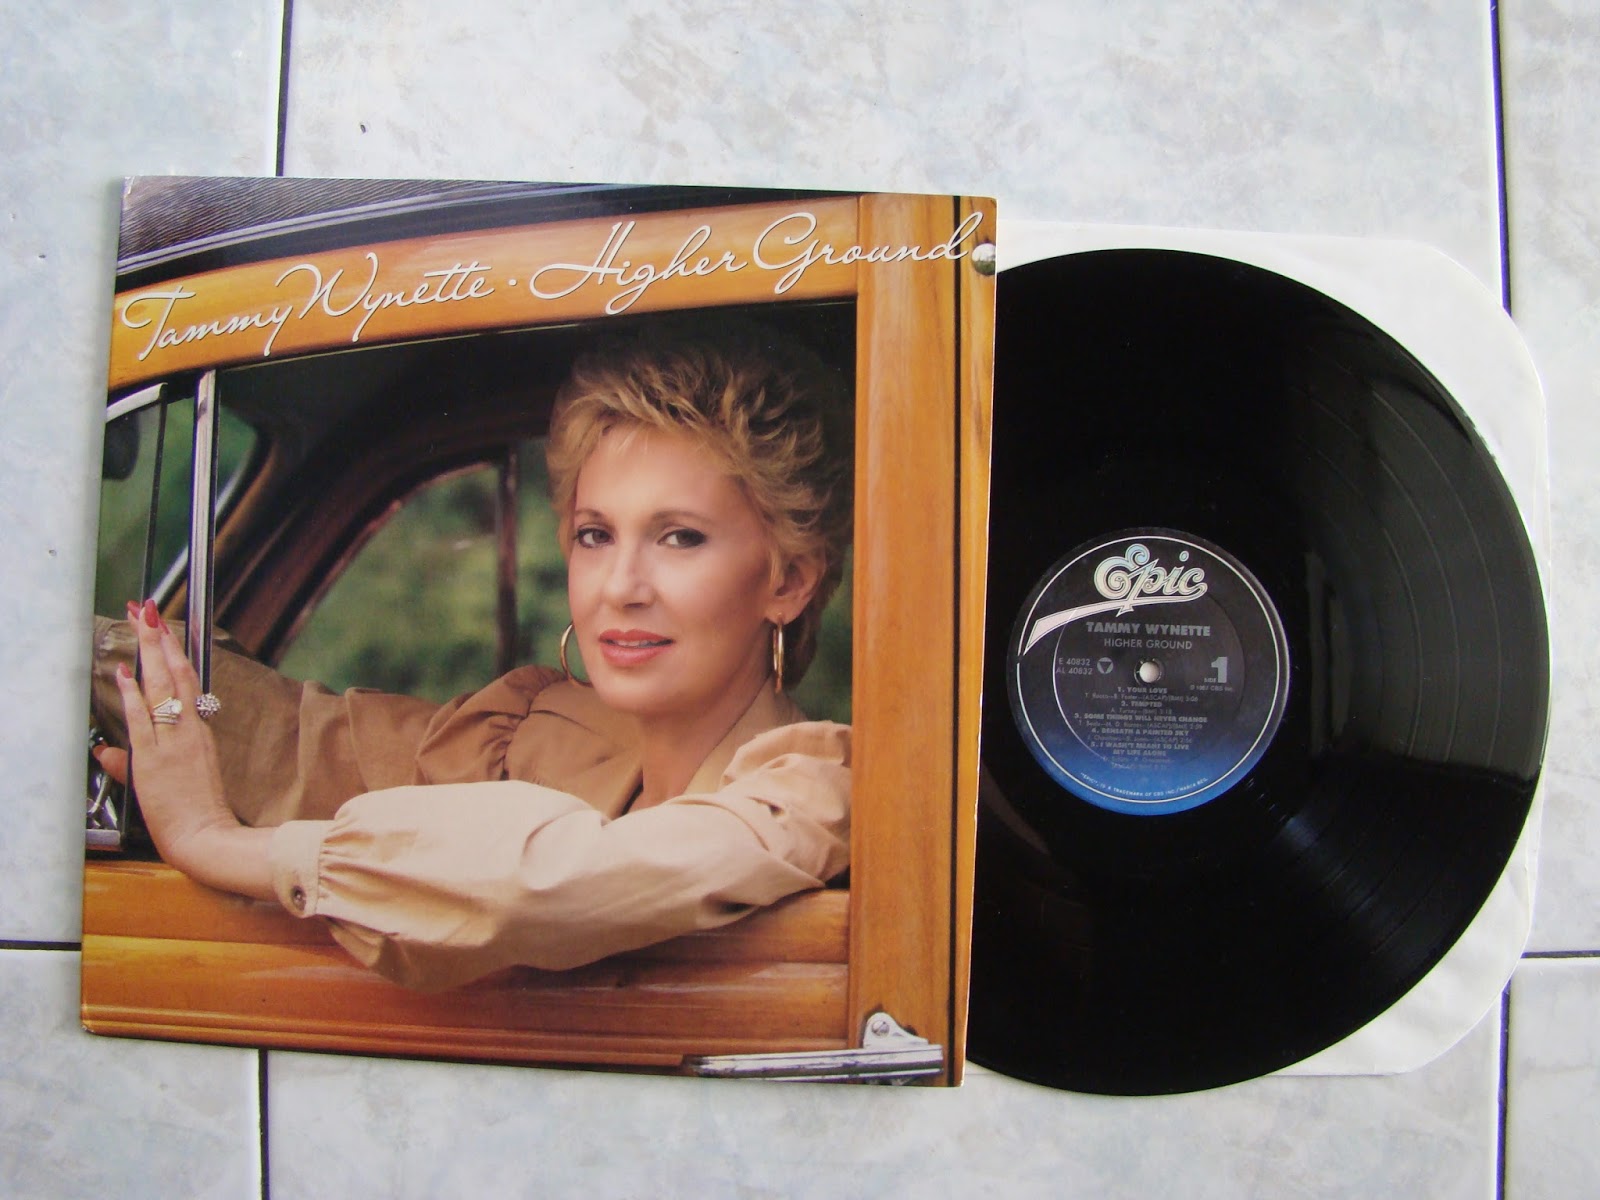 Imported audiophile LP (sold) LP+tammy+wynette